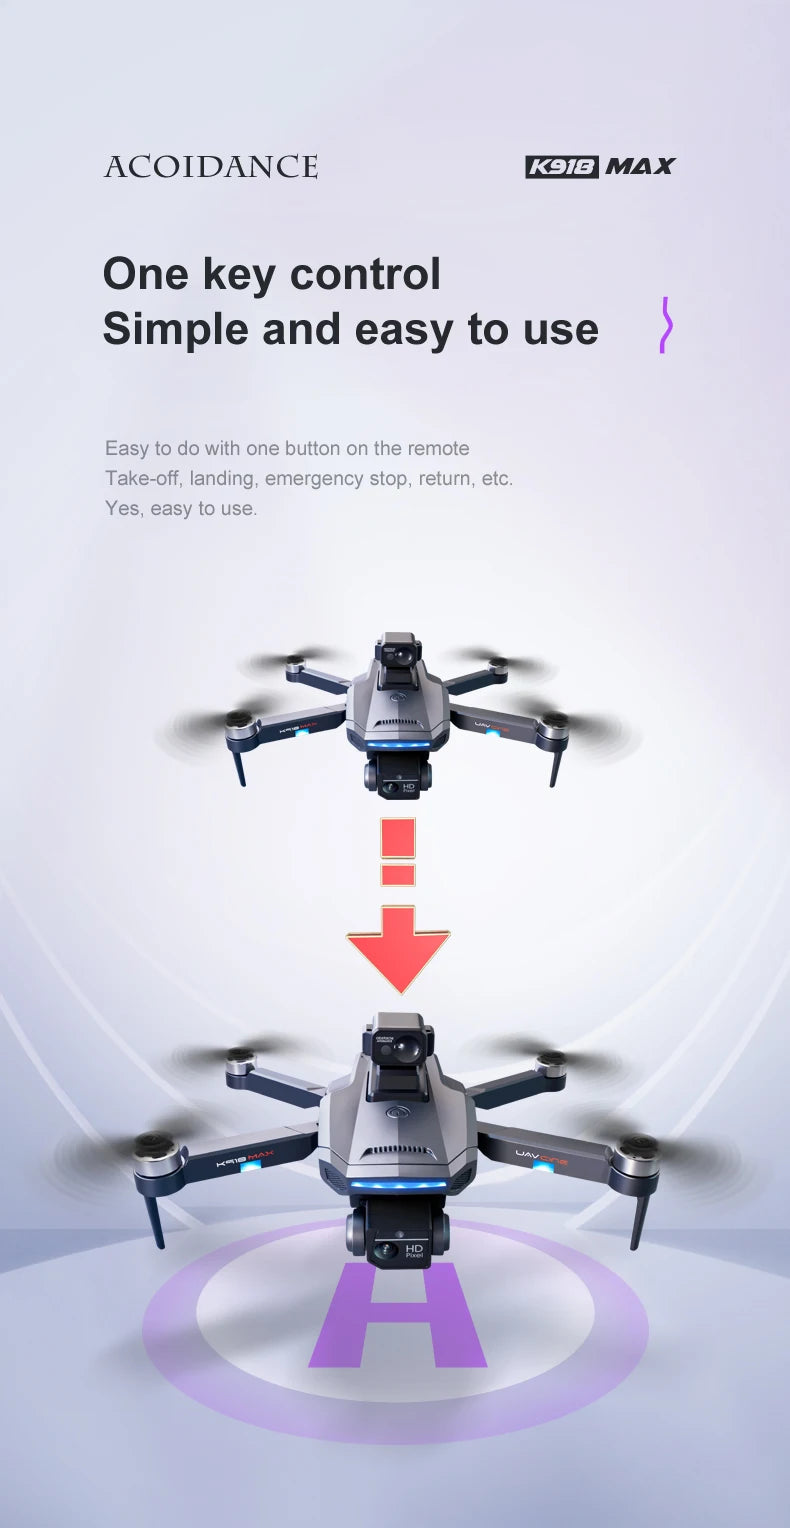 XYRC K918 MAX GPS Drone, ACOIDANCE K91D MAX One key control Simple and easy to use Easy to